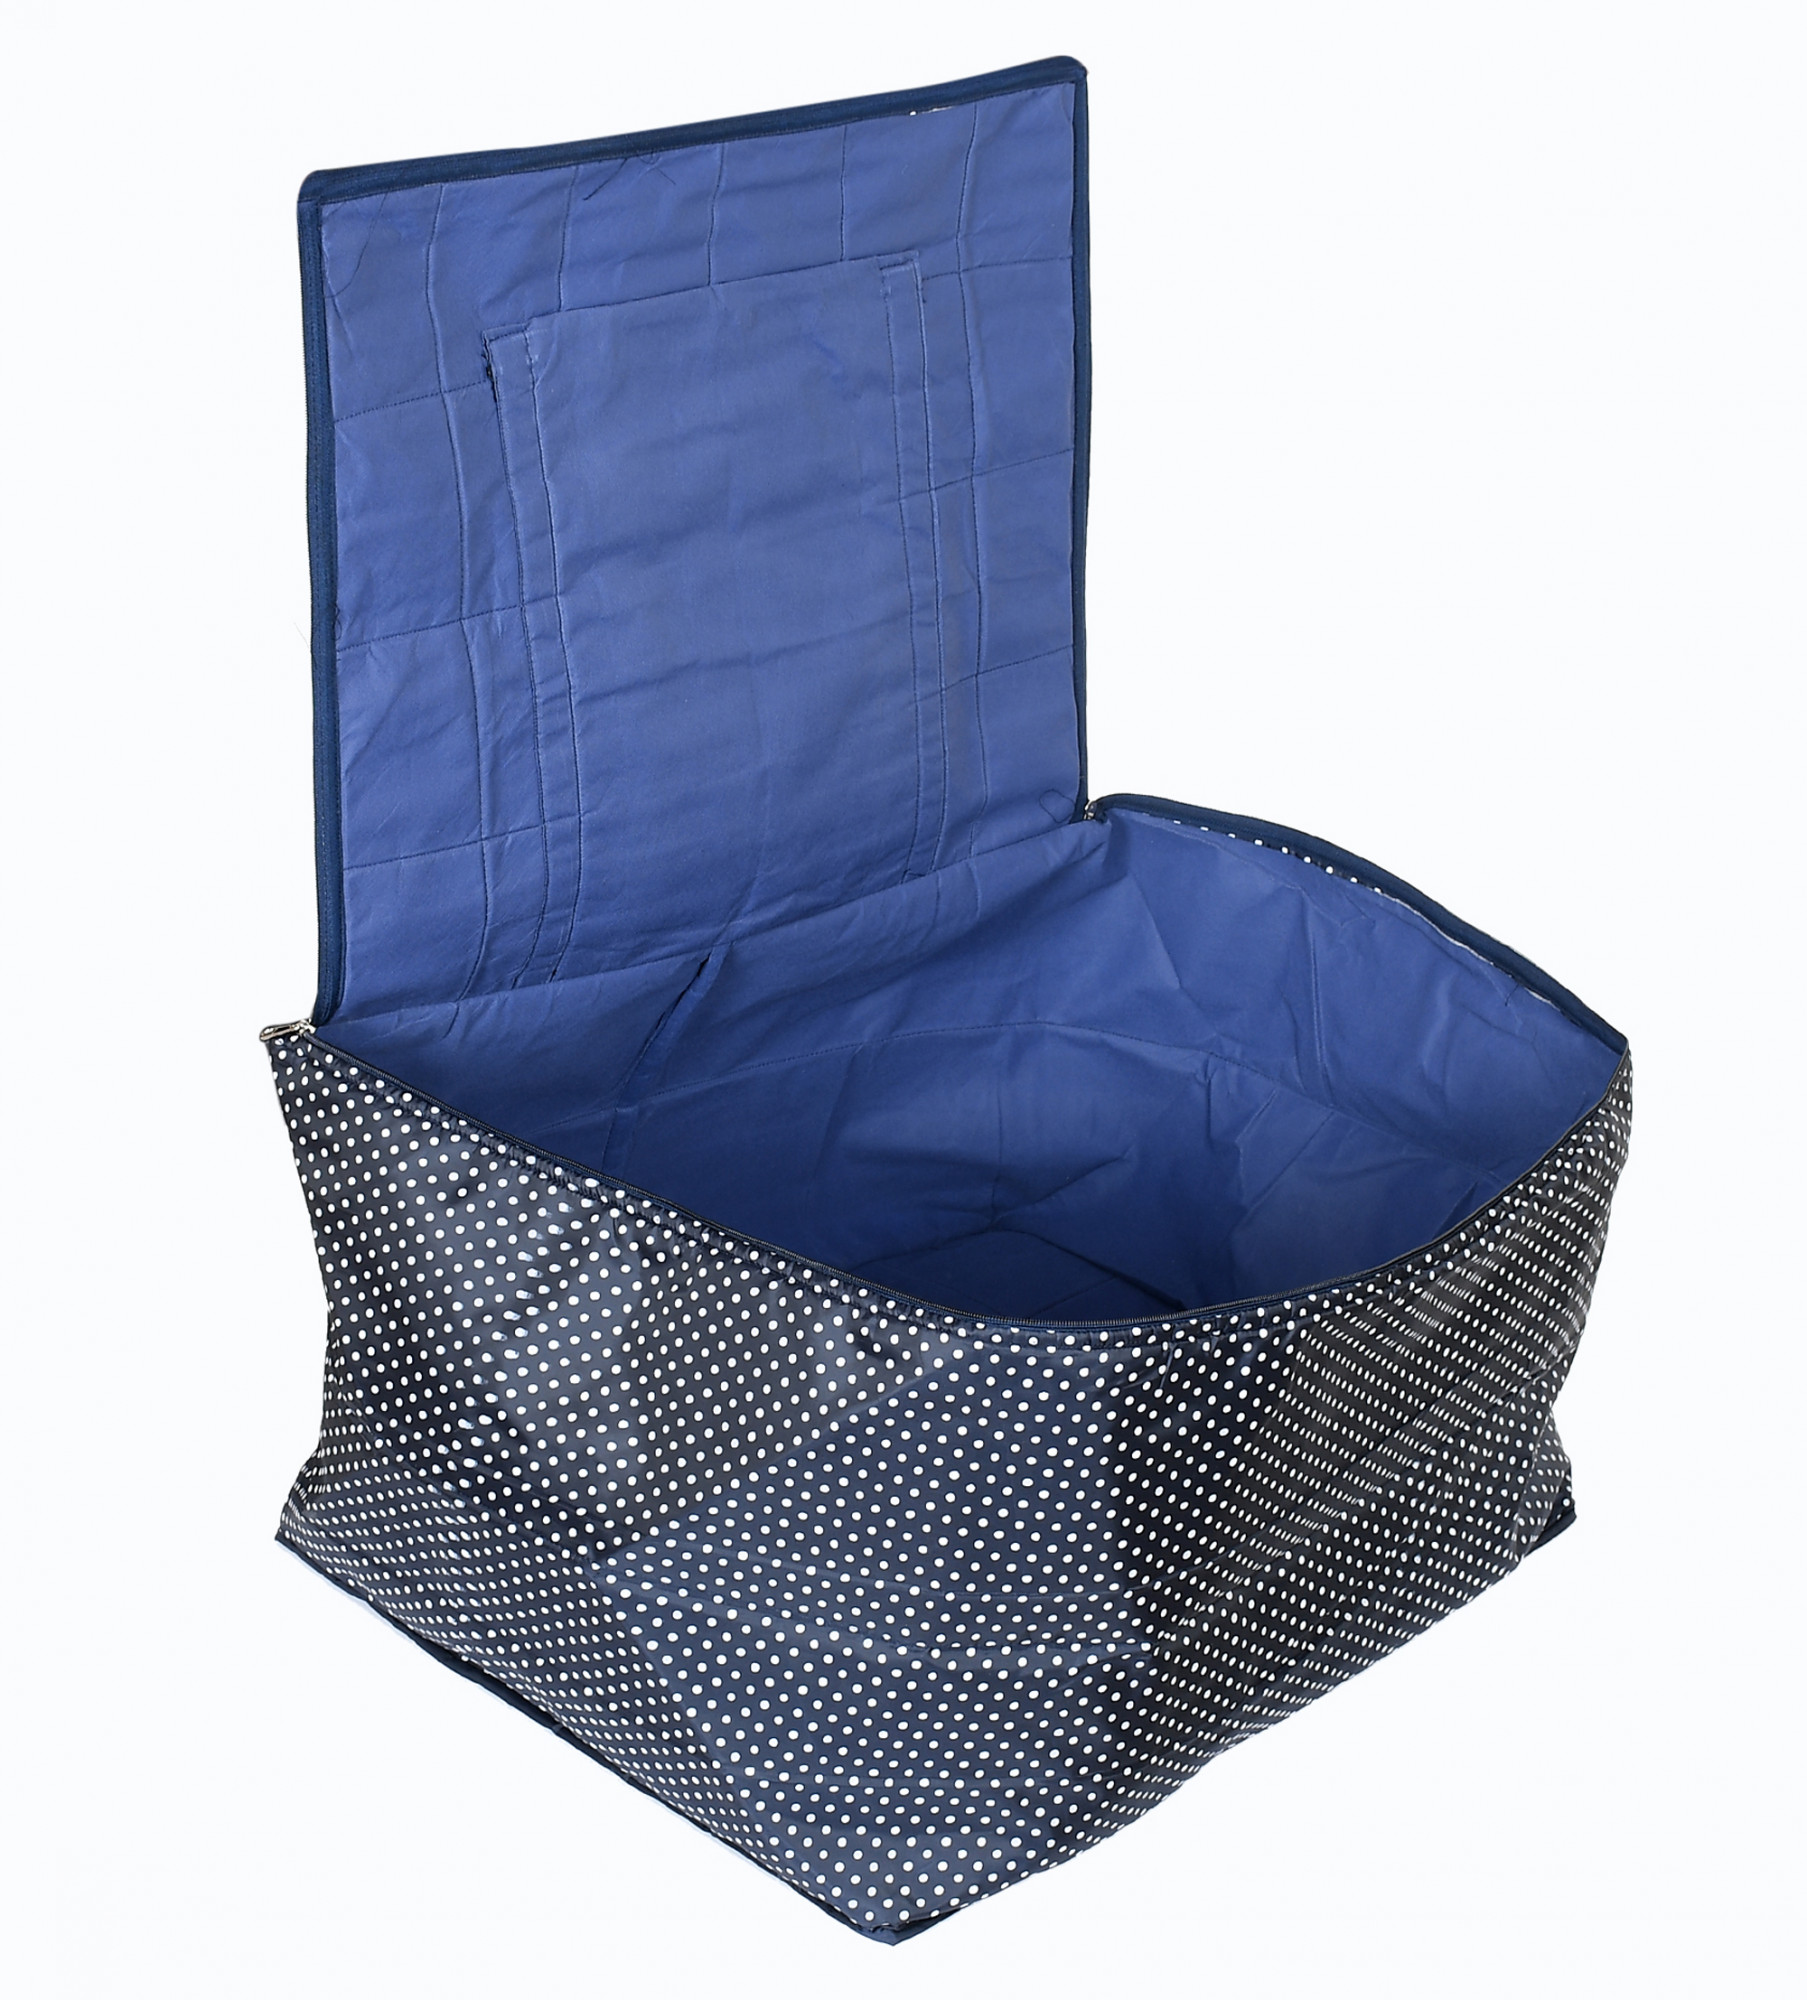 Kuber Industries Dot Printed Large Size Lightweight Foldable Parachute Jumbo Underbed Storage Bag With Zipper And Handle (Blue)